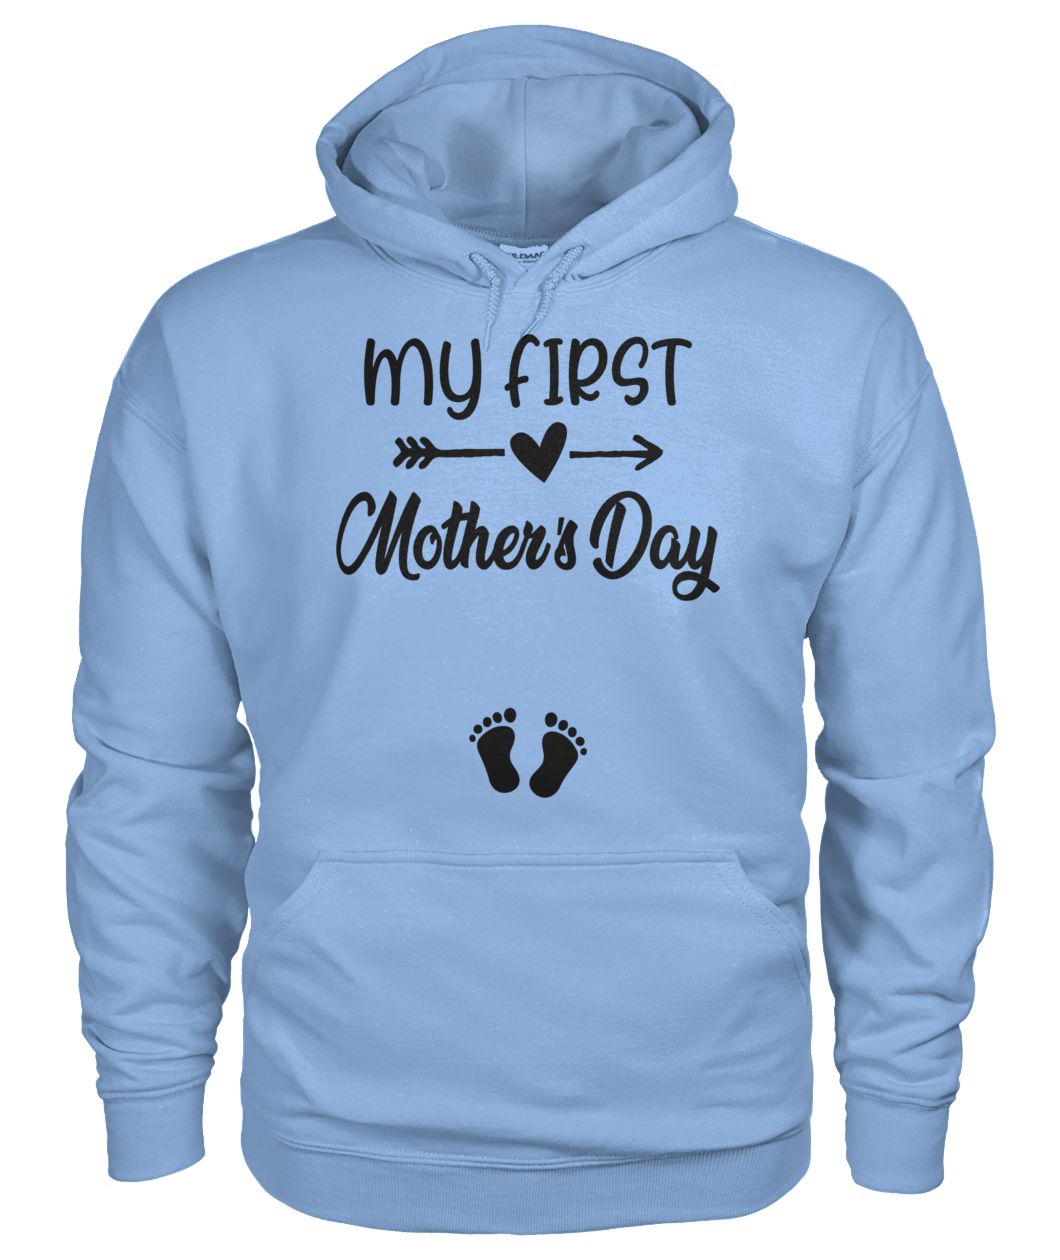 My first mother's day pregnancy announcement gildan hoodie